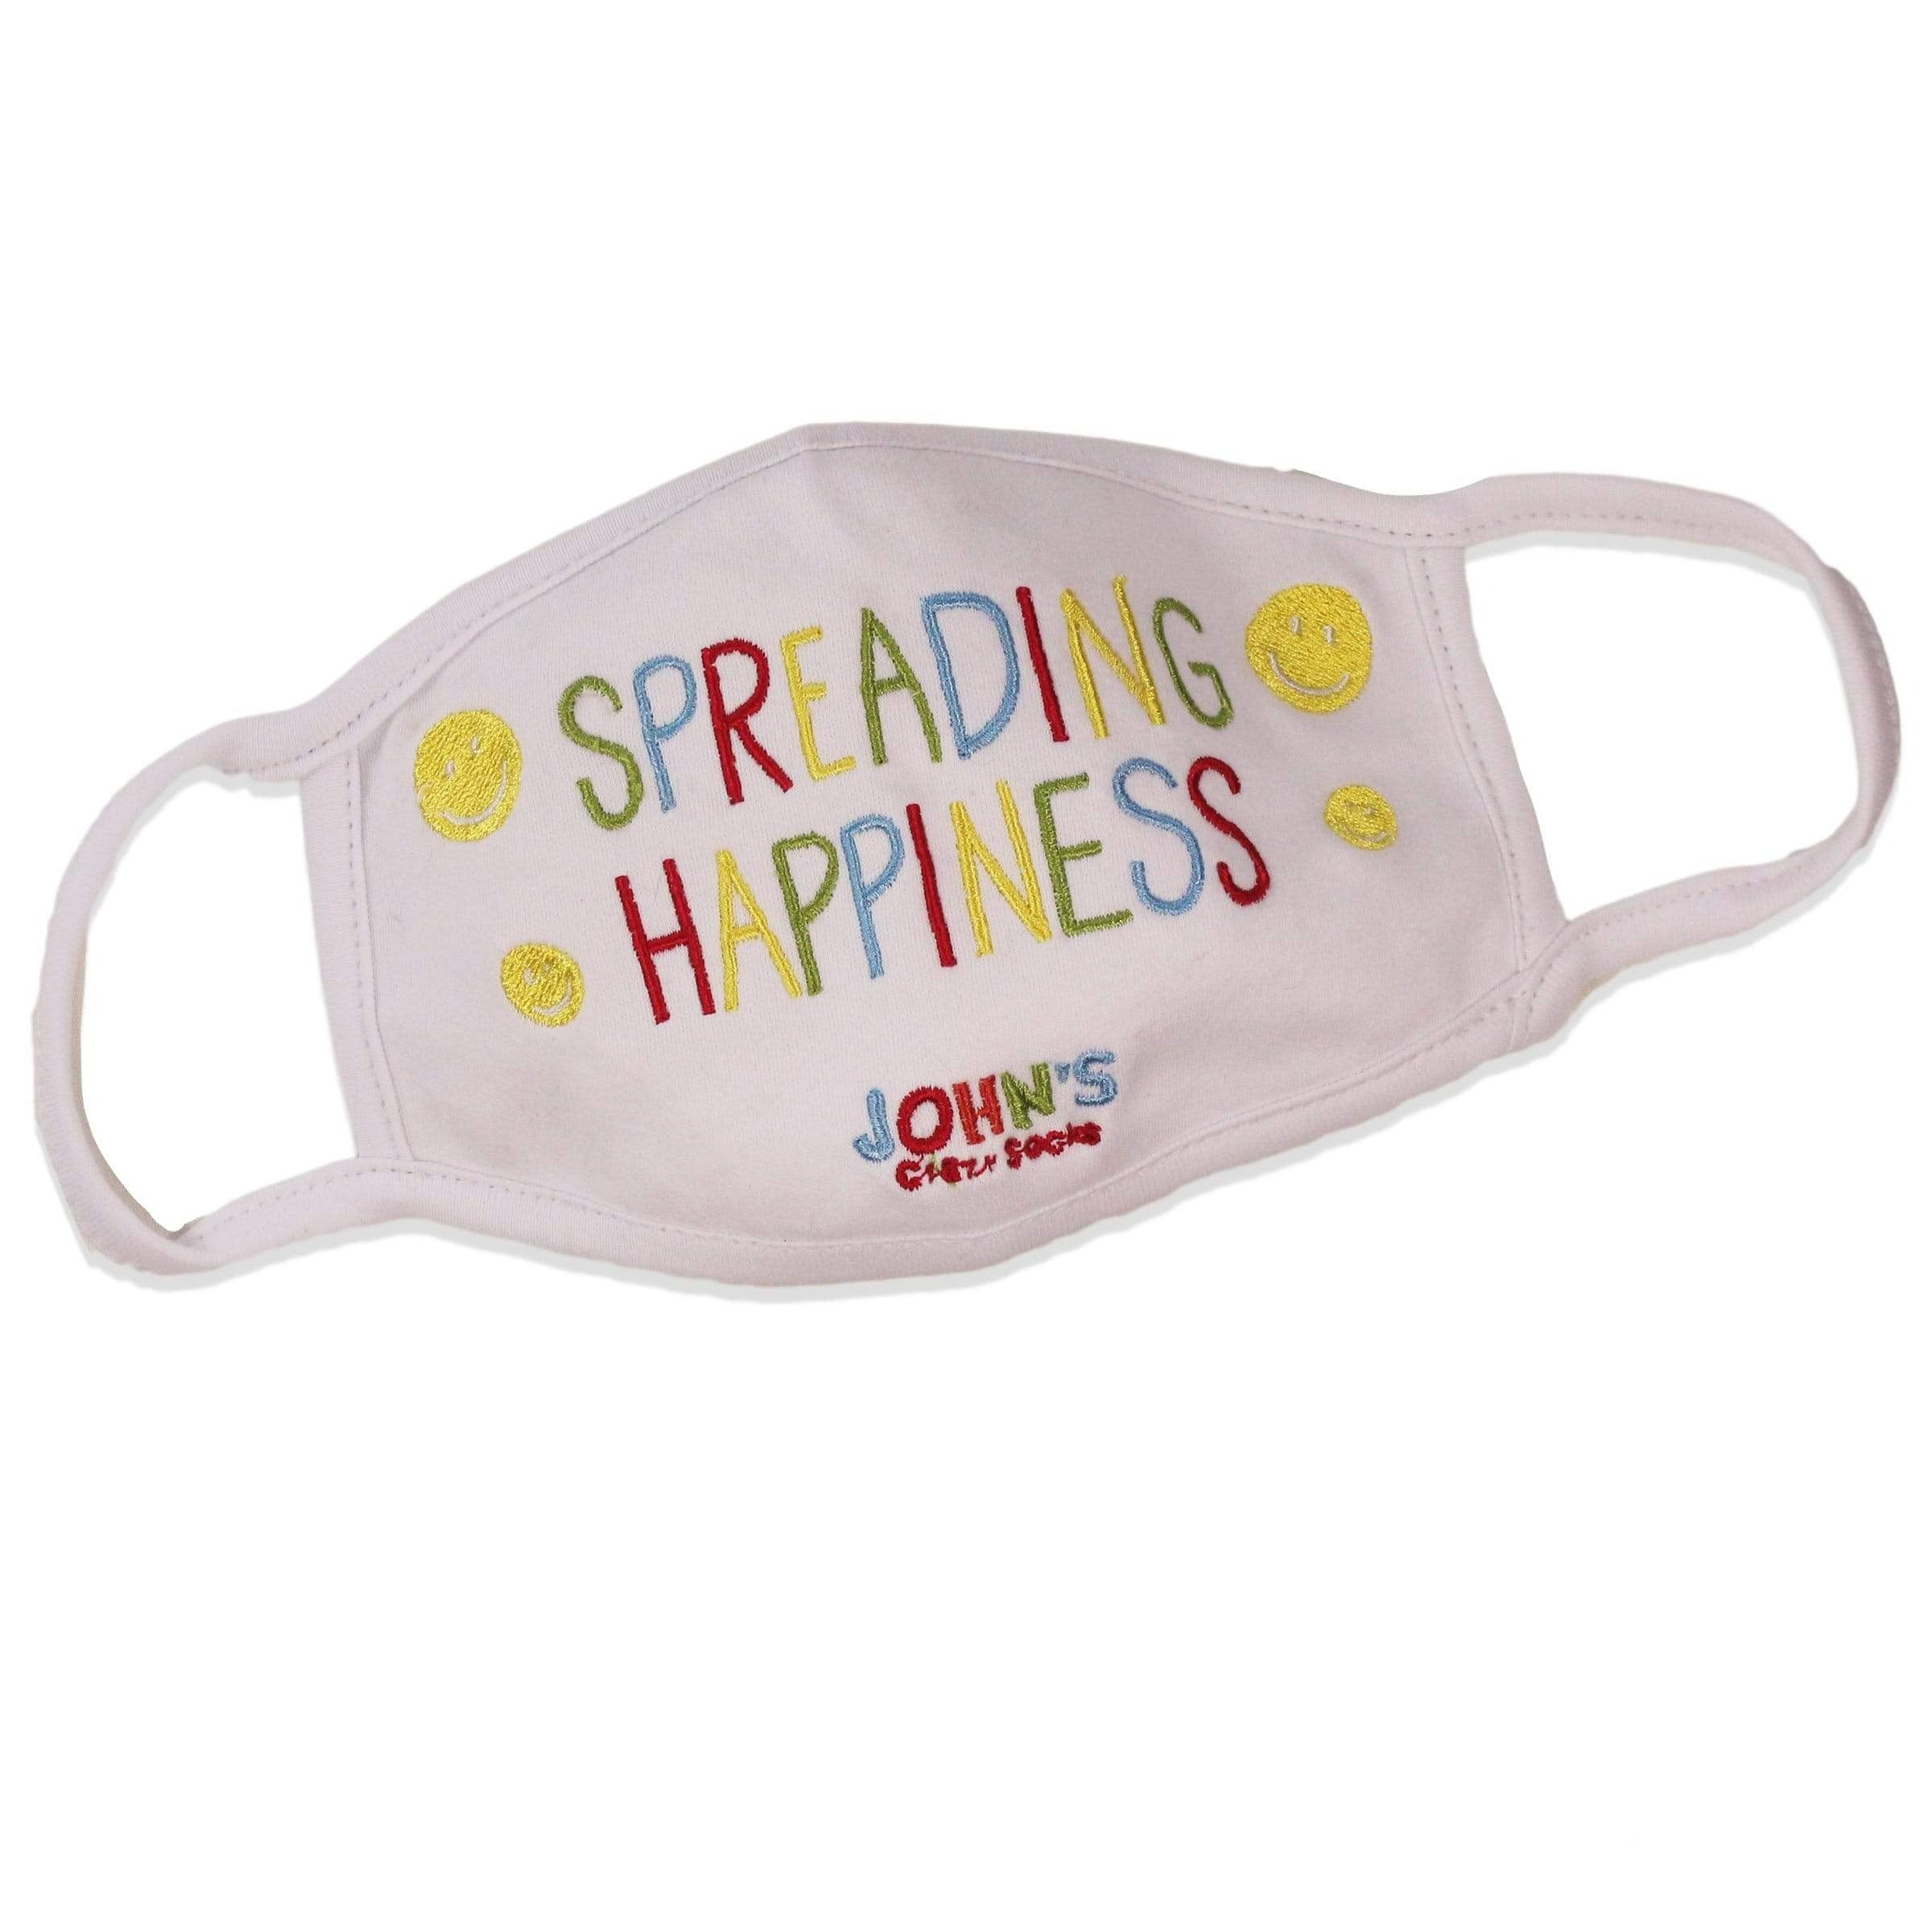 Spreading Happiness Face Mask White